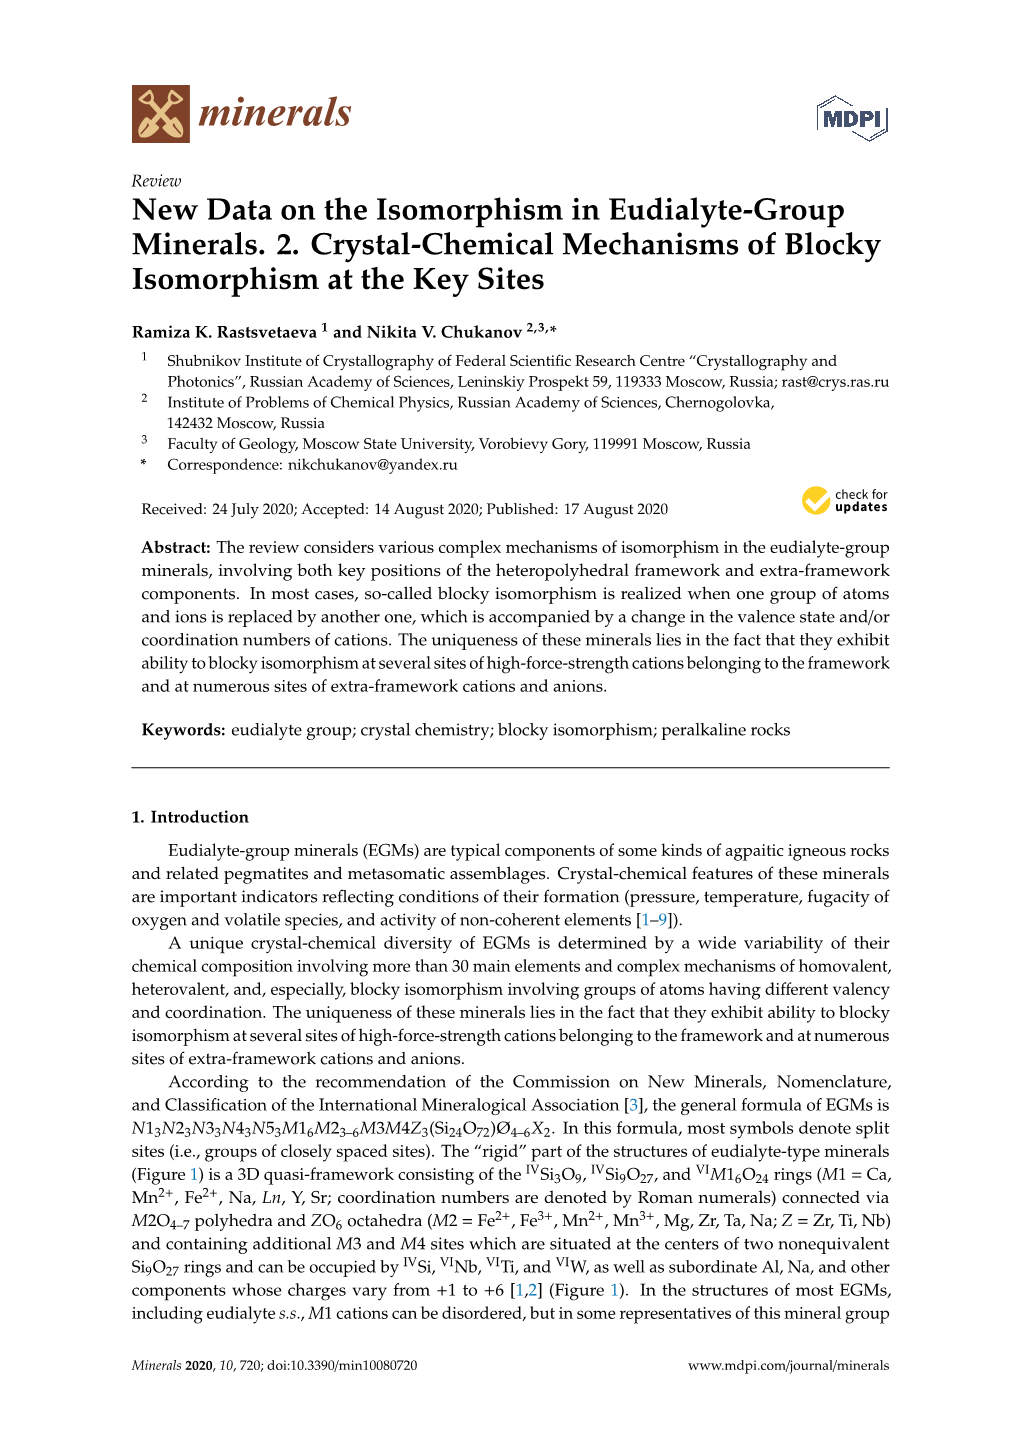 New Data on the Isomorphism in Eudialyte-Group Minerals. 2